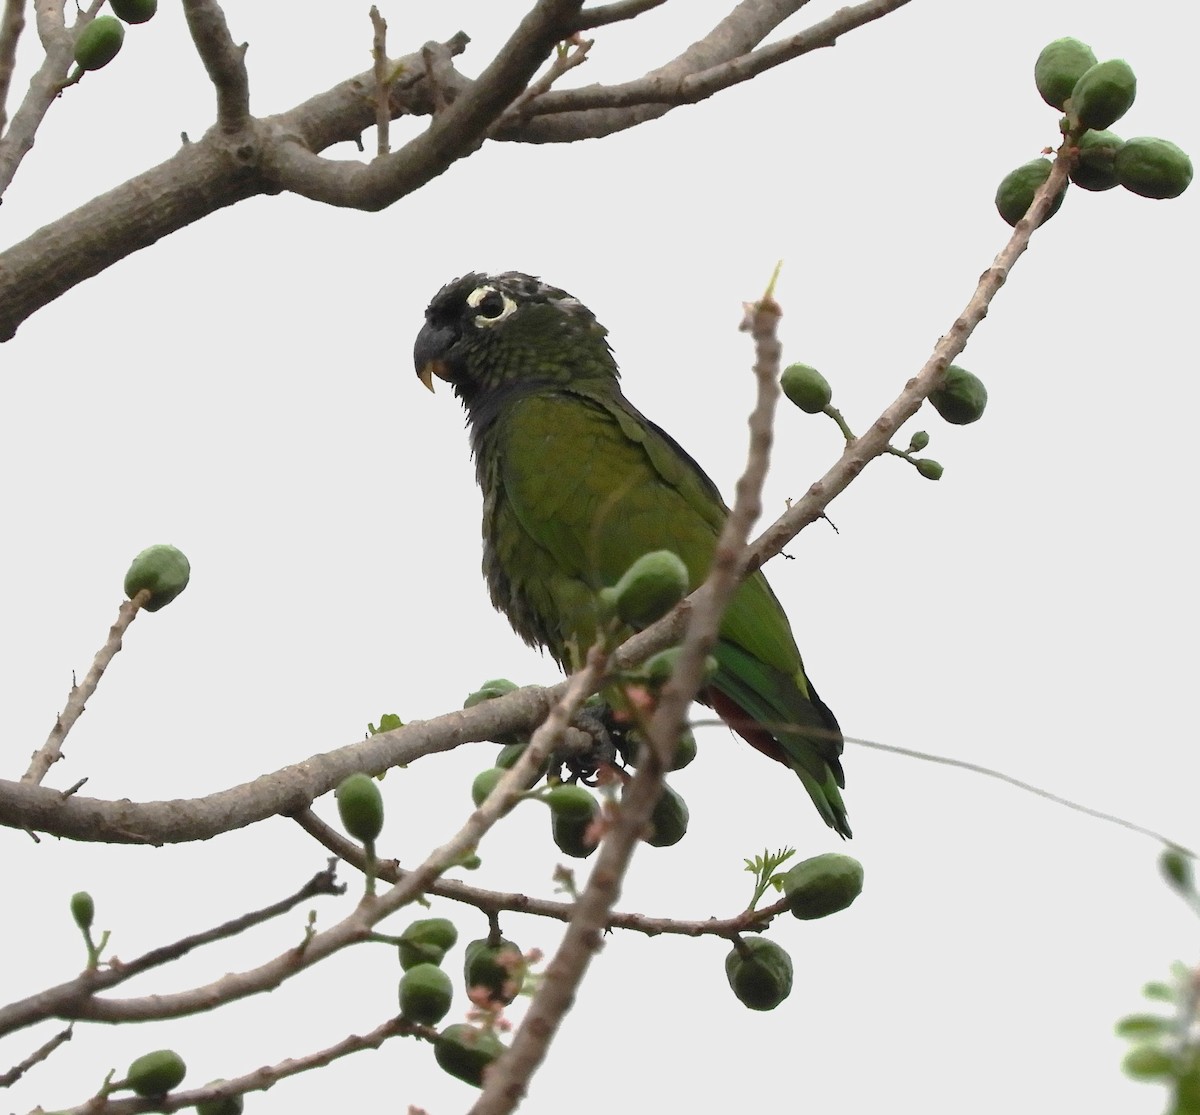 Scaly-headed Parrot - Cynthia Nickerson